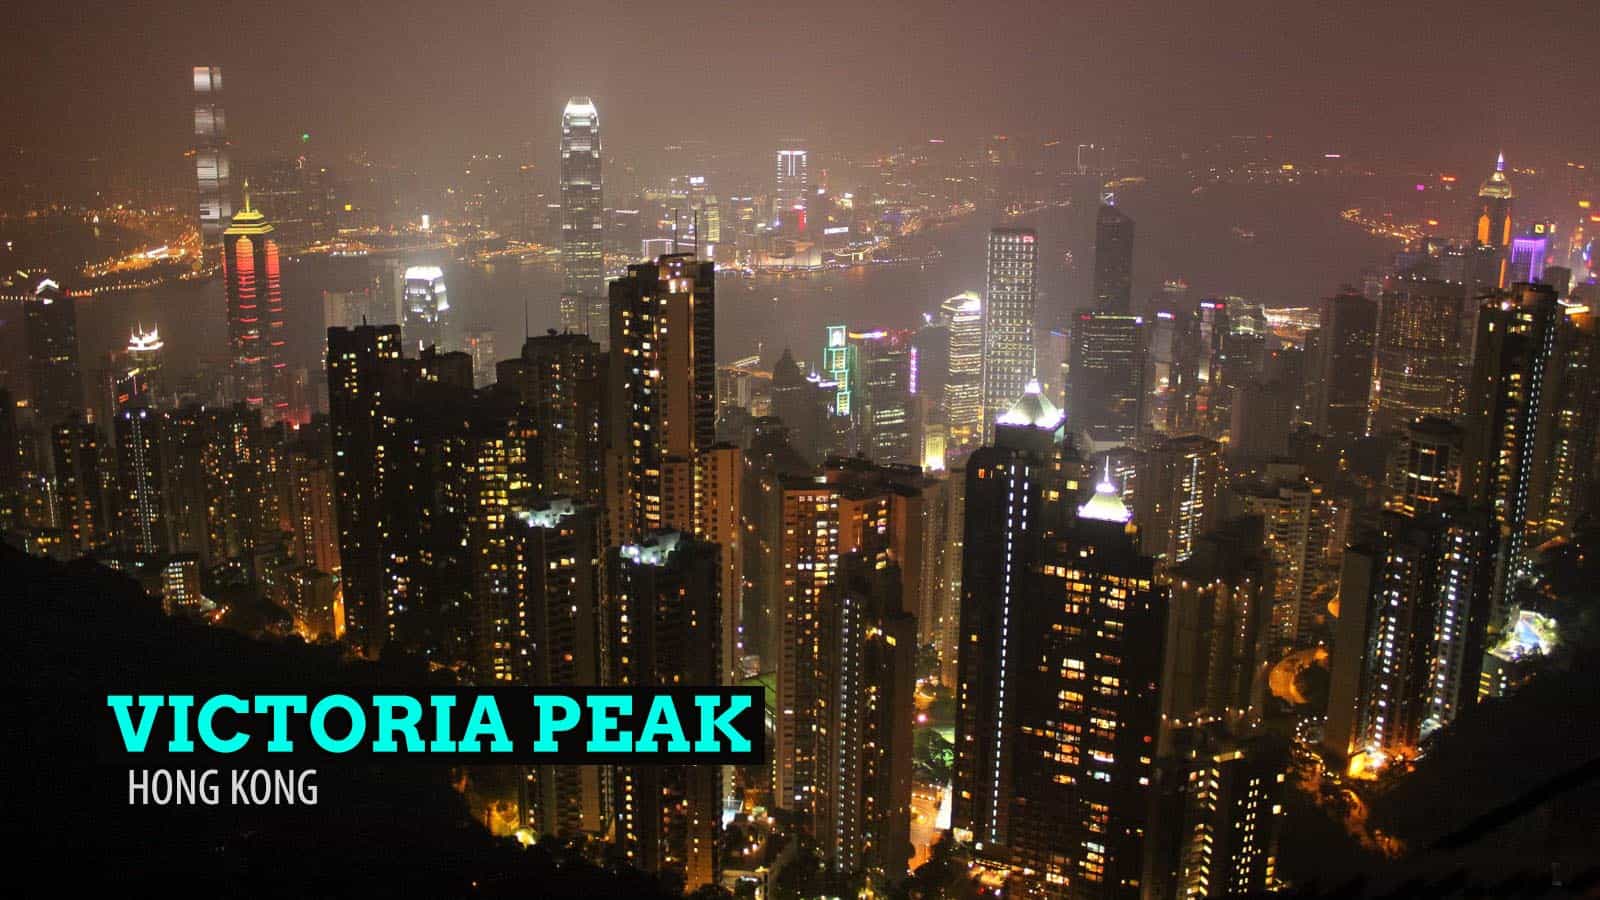 VICTORIA PEAK: Surreal Perspectives from Hong Kong’s Highest